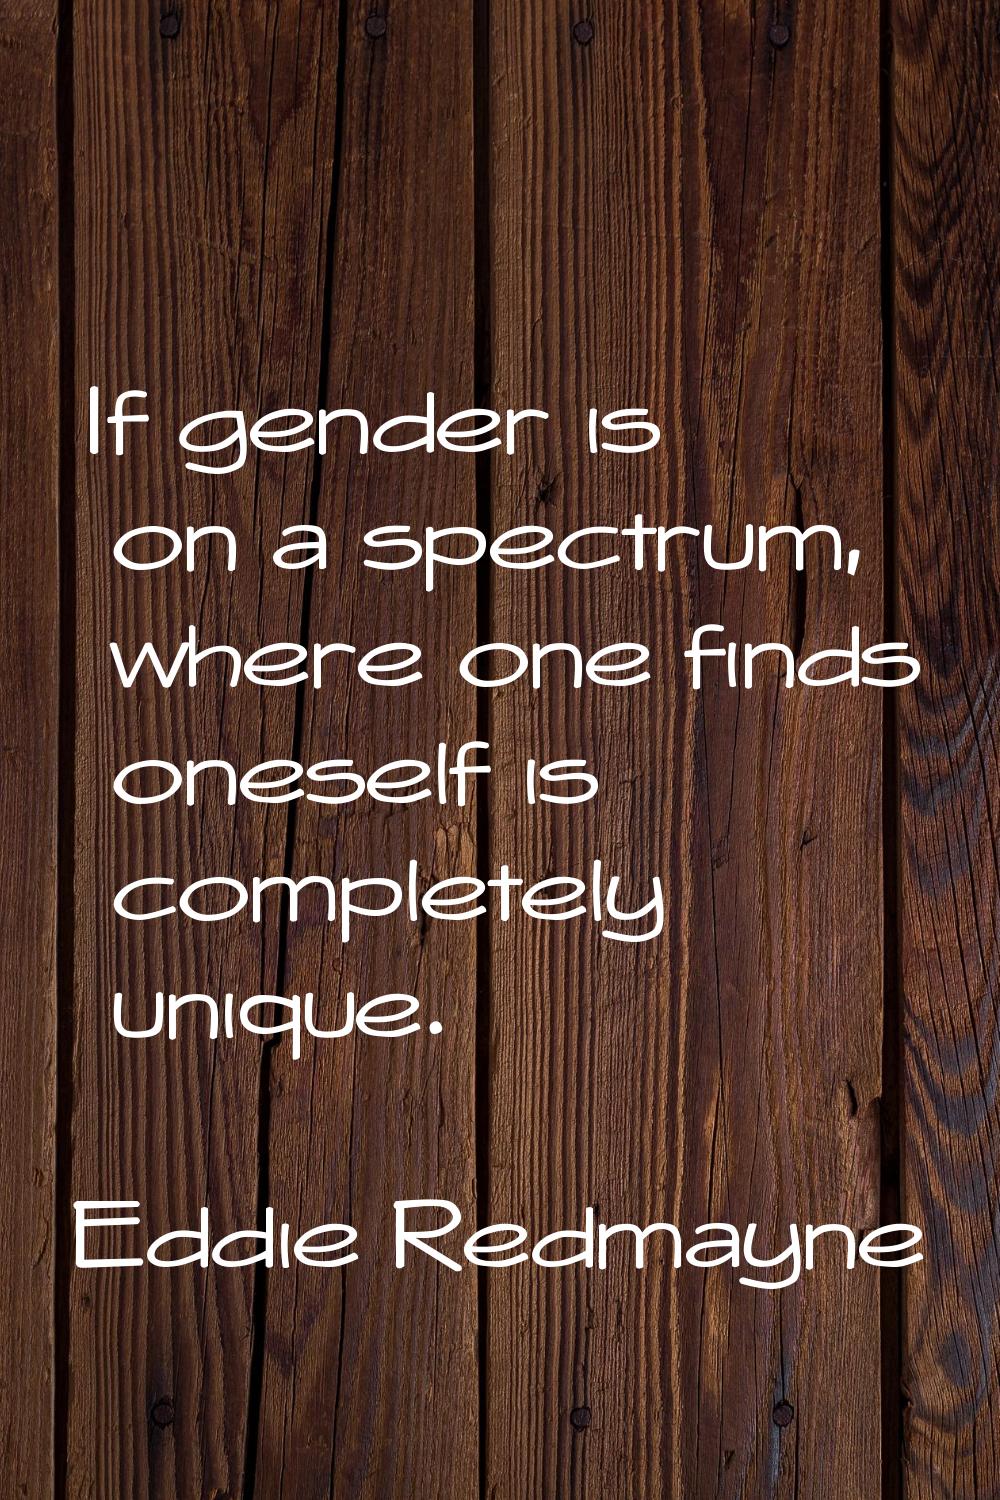 If gender is on a spectrum, where one finds oneself is completely unique.